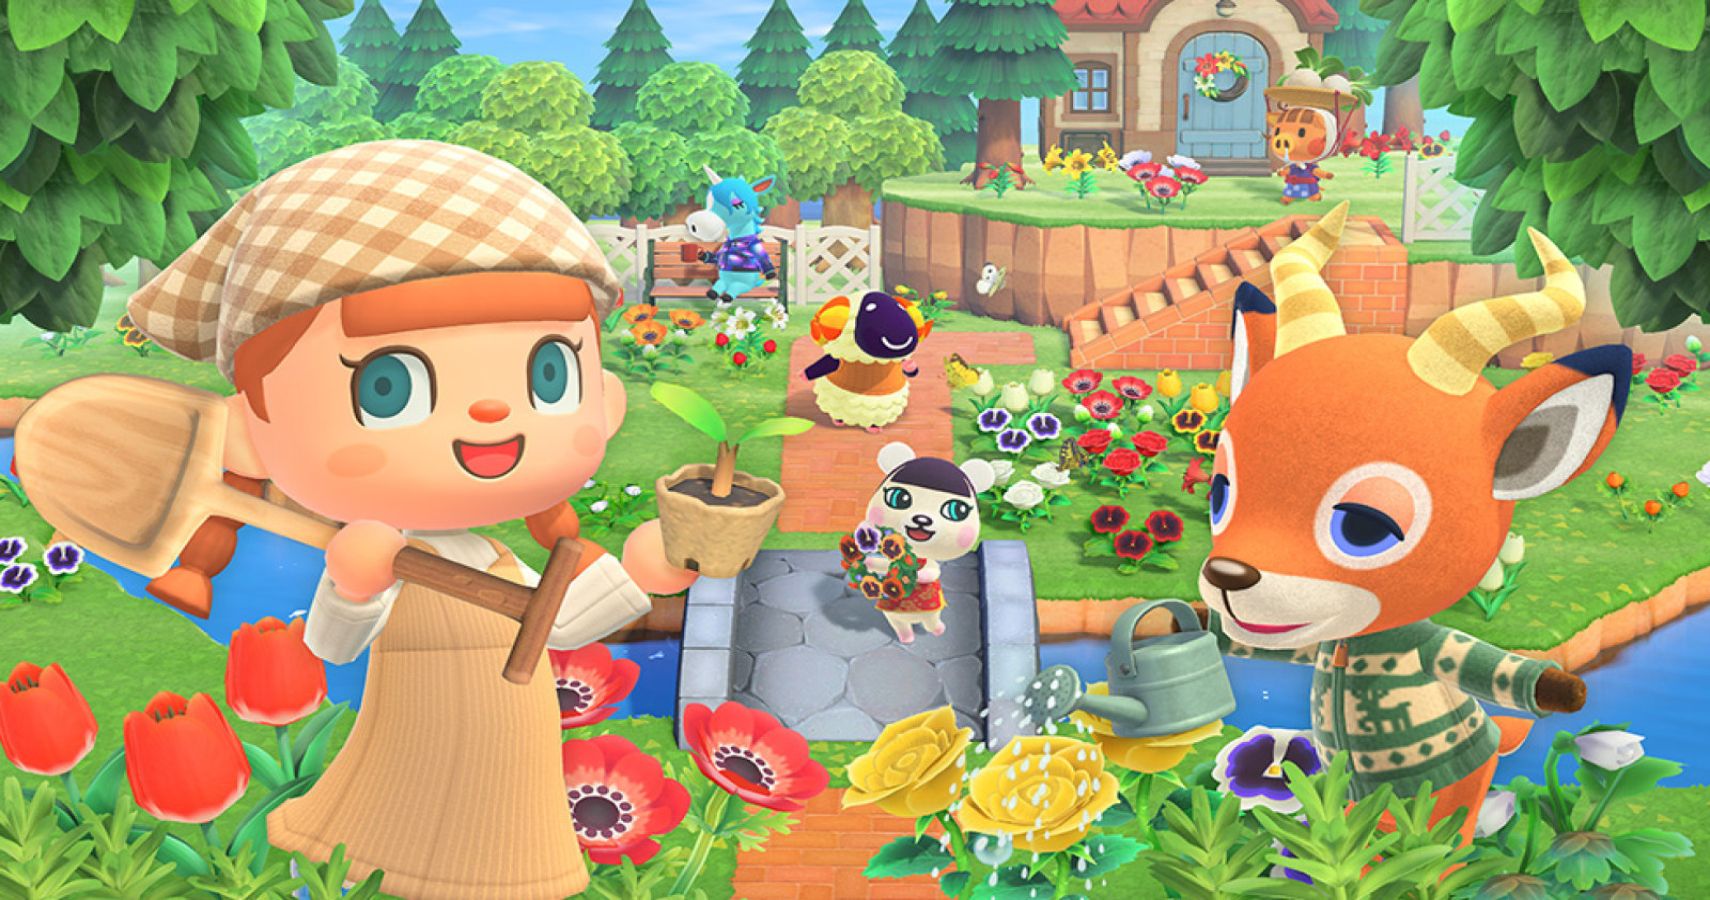 10 Of The Coolest And Quirkiest Animal Crossing Fan Art